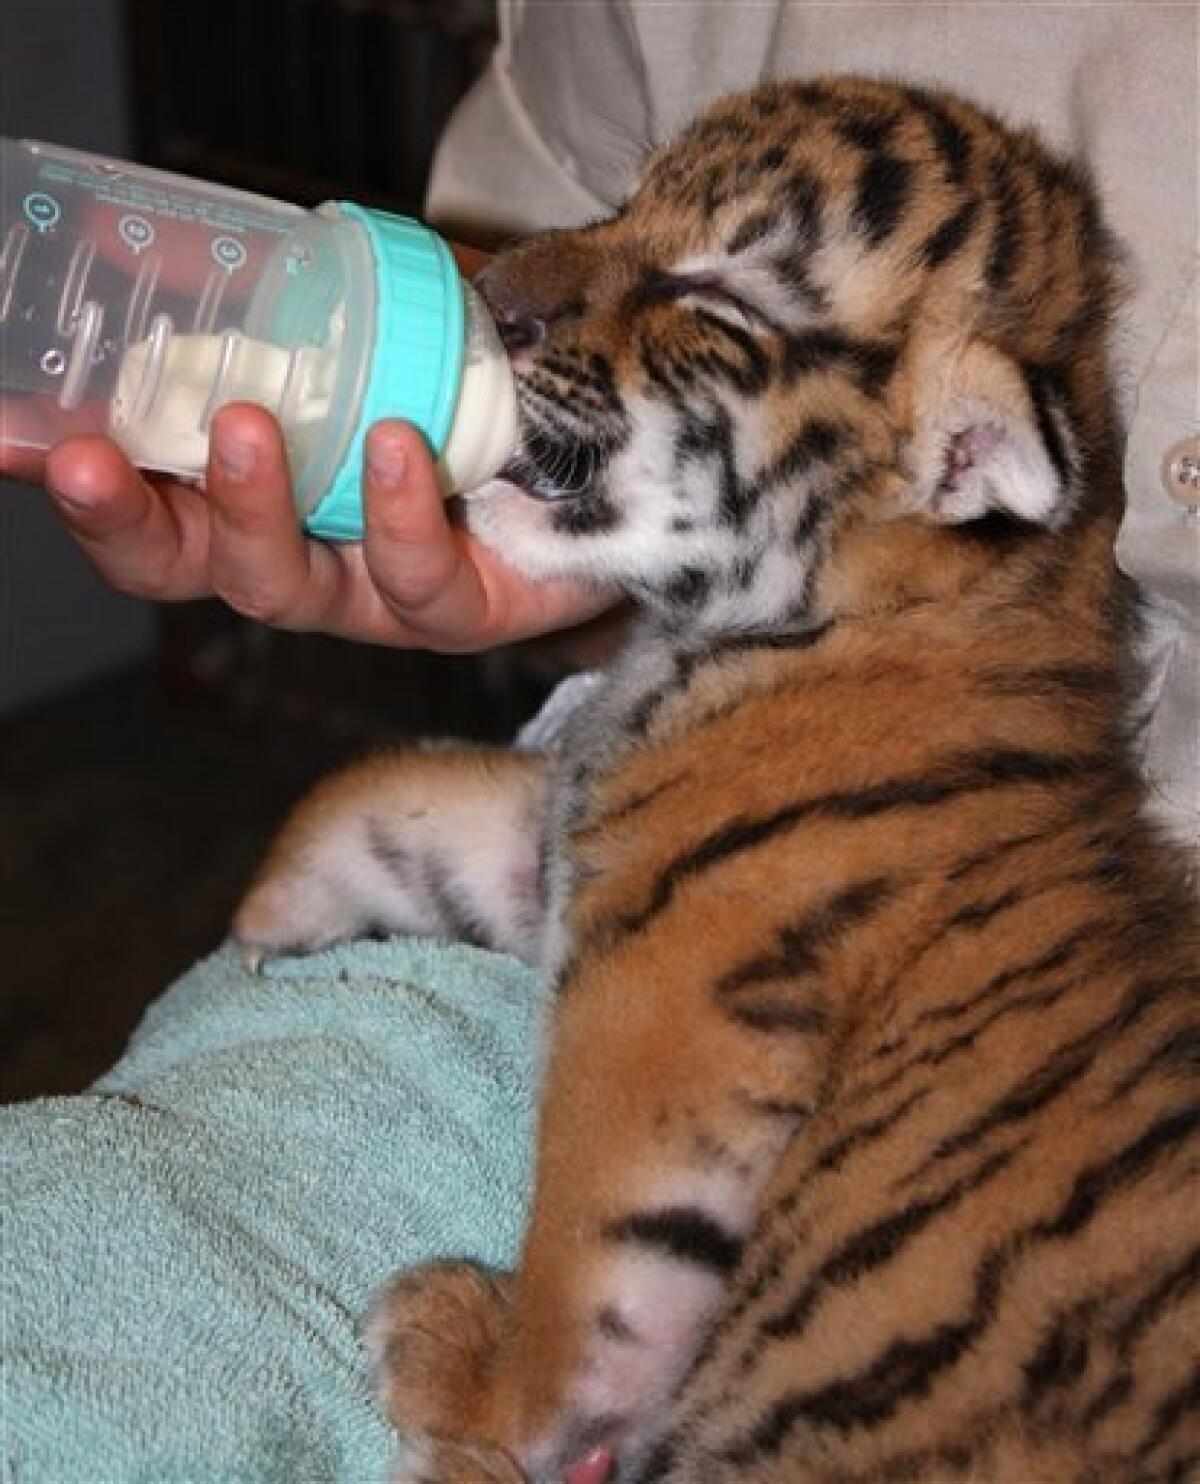 Baby tigers born at the Minnesota Zoo